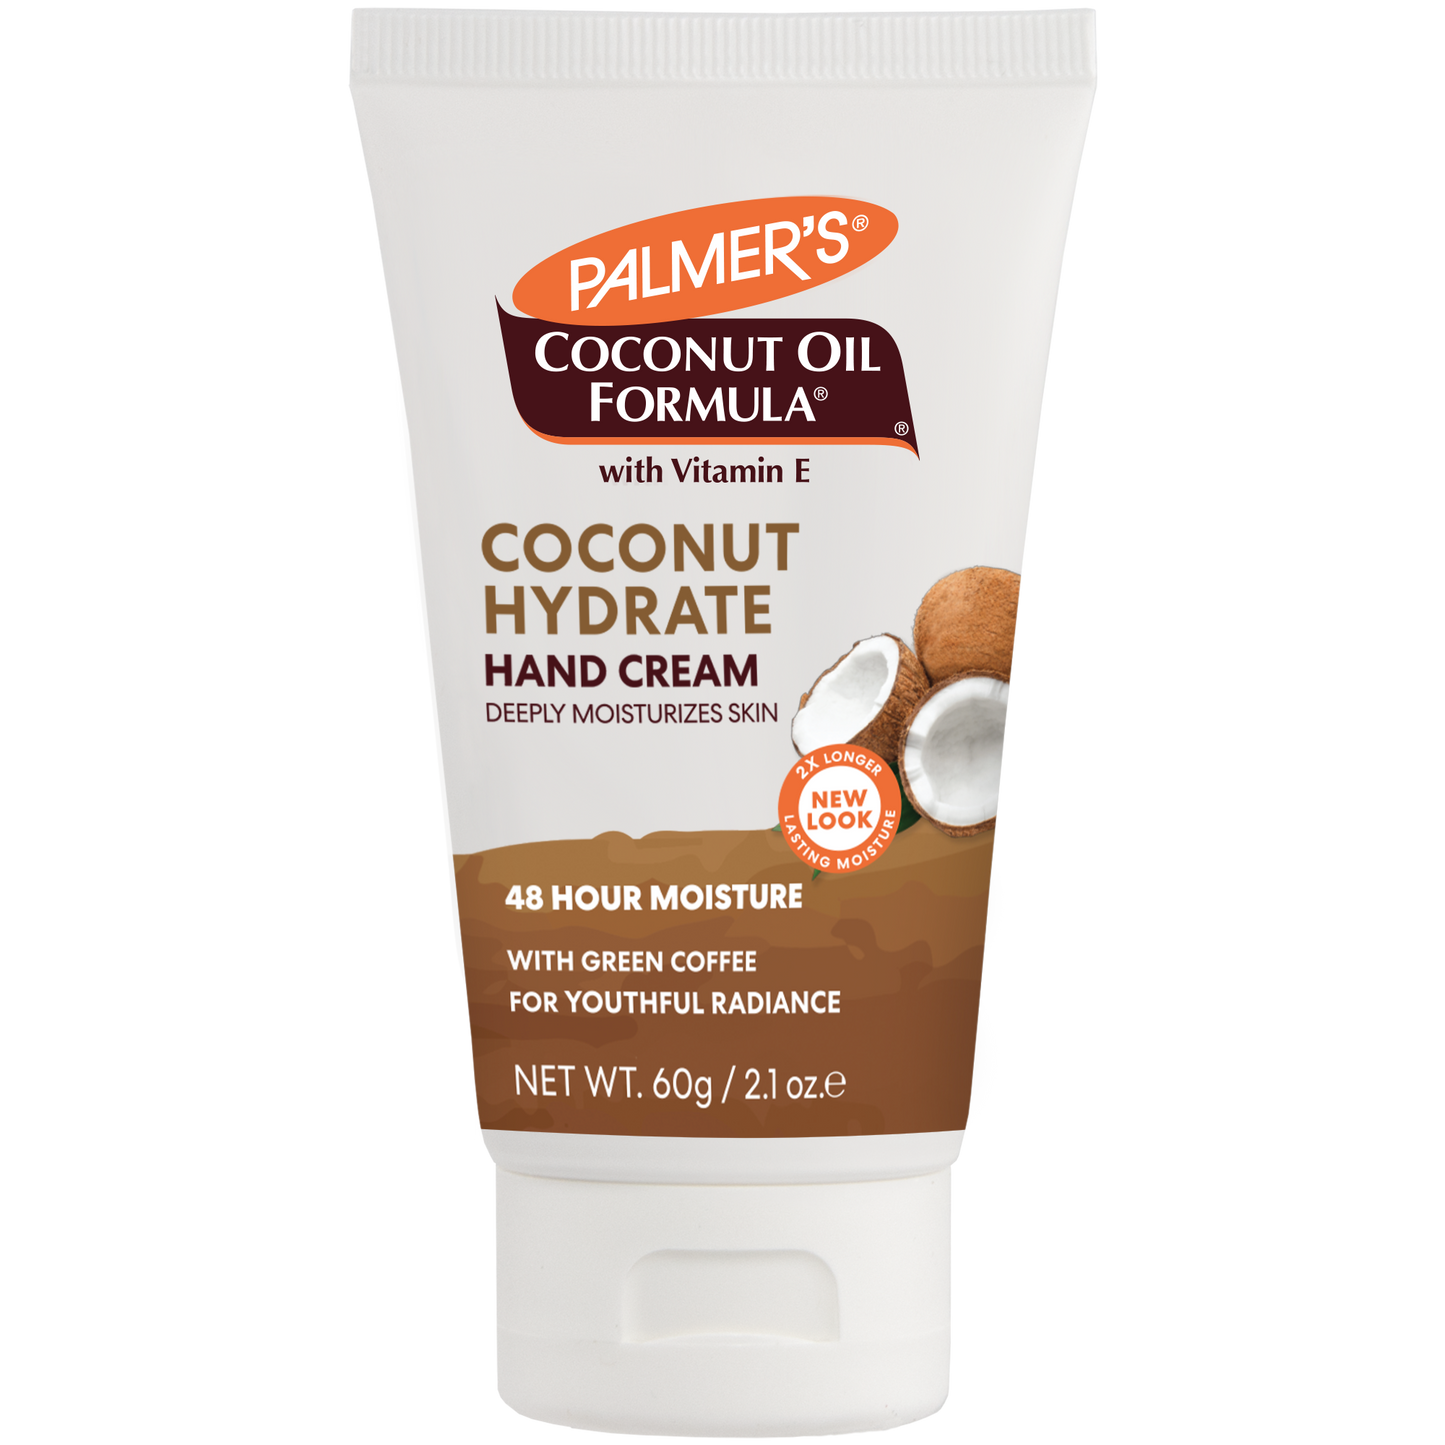 Palmers Coconut Butter handcreme